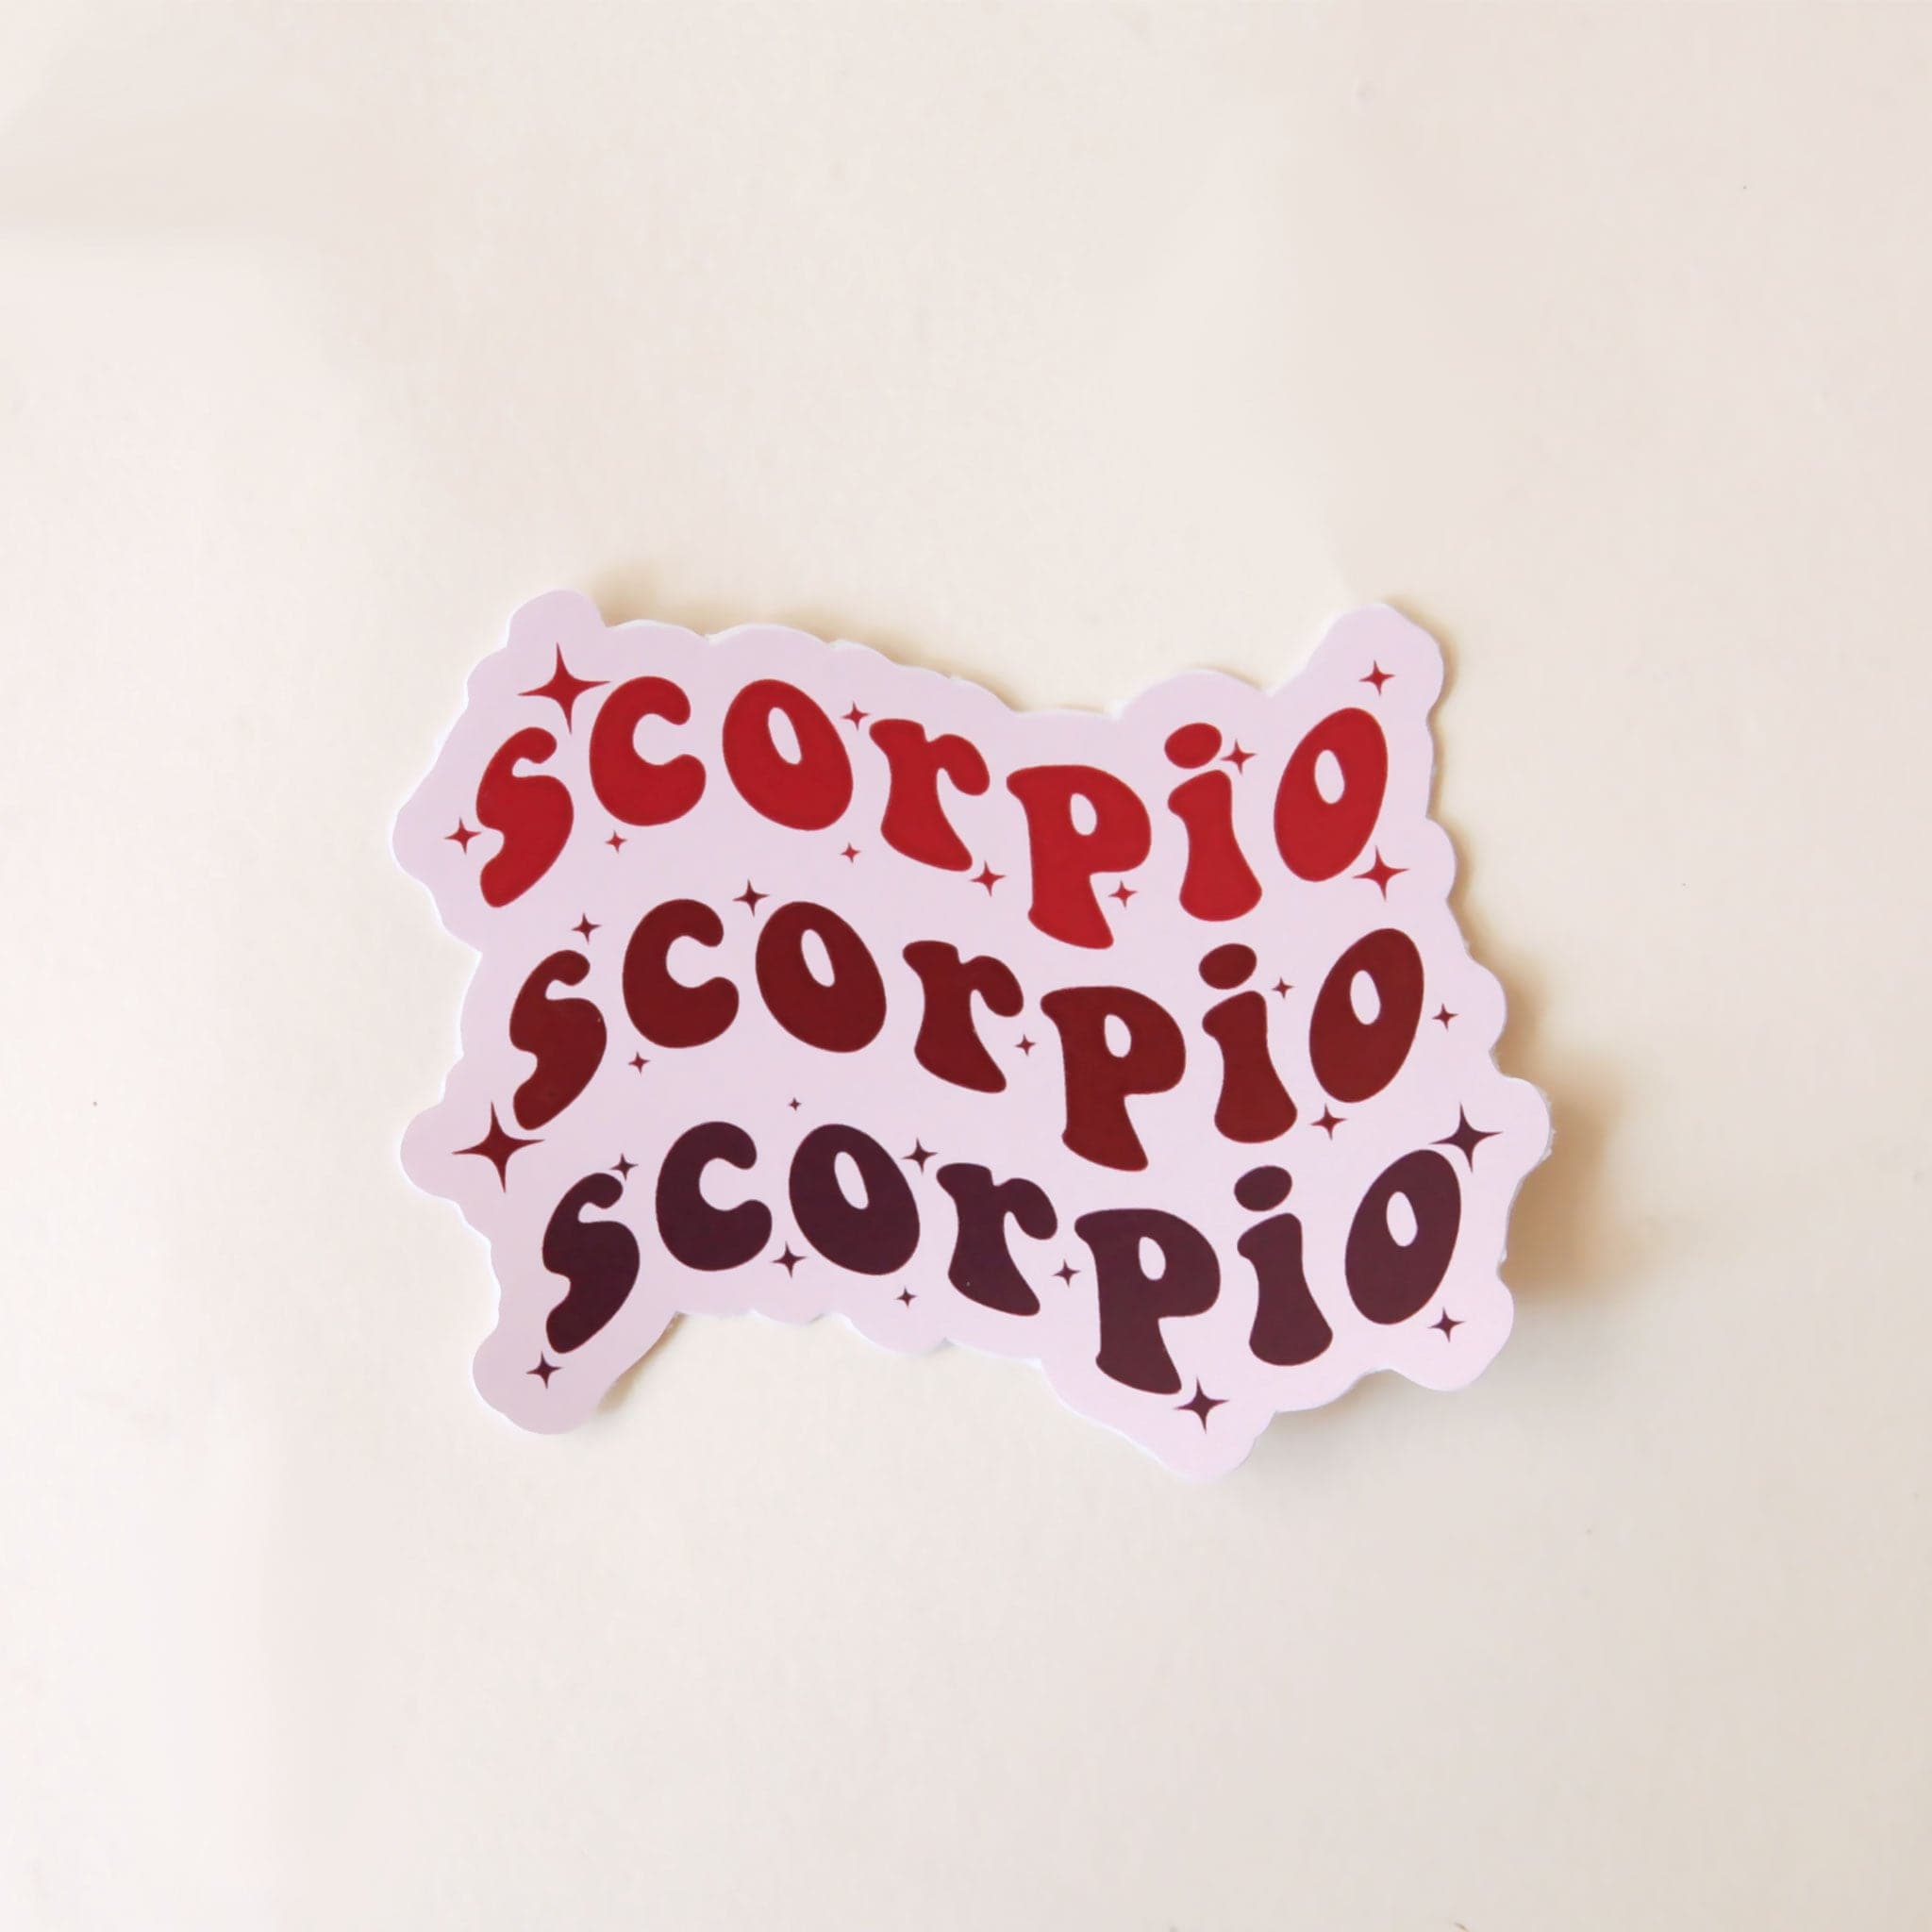 On a white background is a sticker with the word &quot;Scorpio&quot; stacked on top of one another three times in a wavy design. 